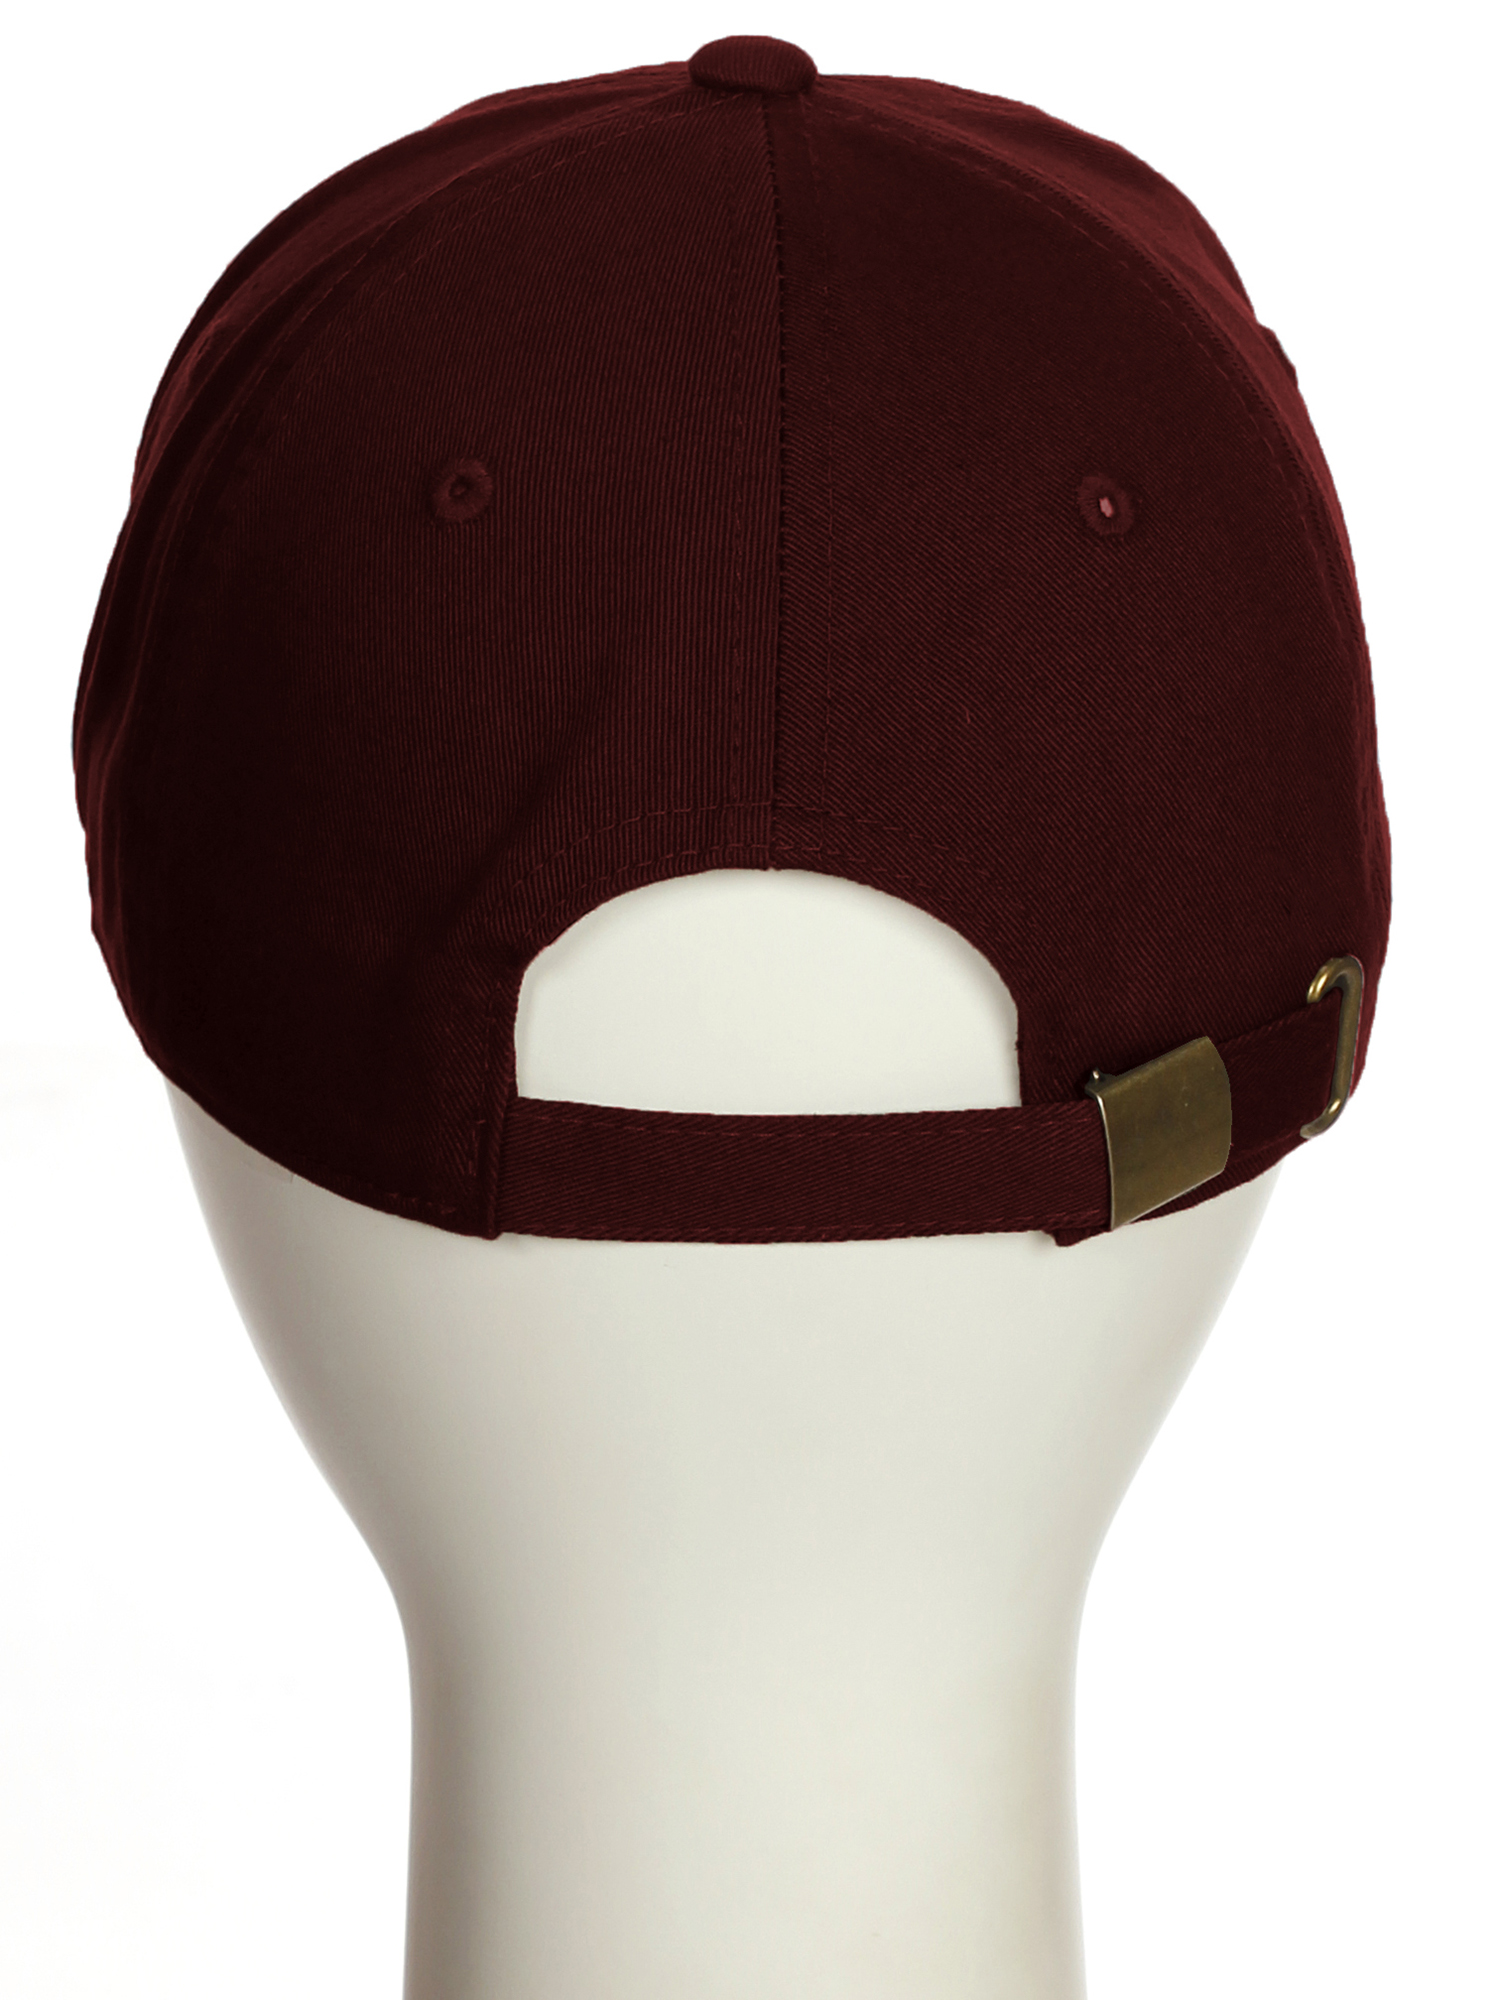 Custom Hat A to Z Initial Letters Classic Baseball Cap, Burgundy Hat White Navy Letter H - image 4 of 4